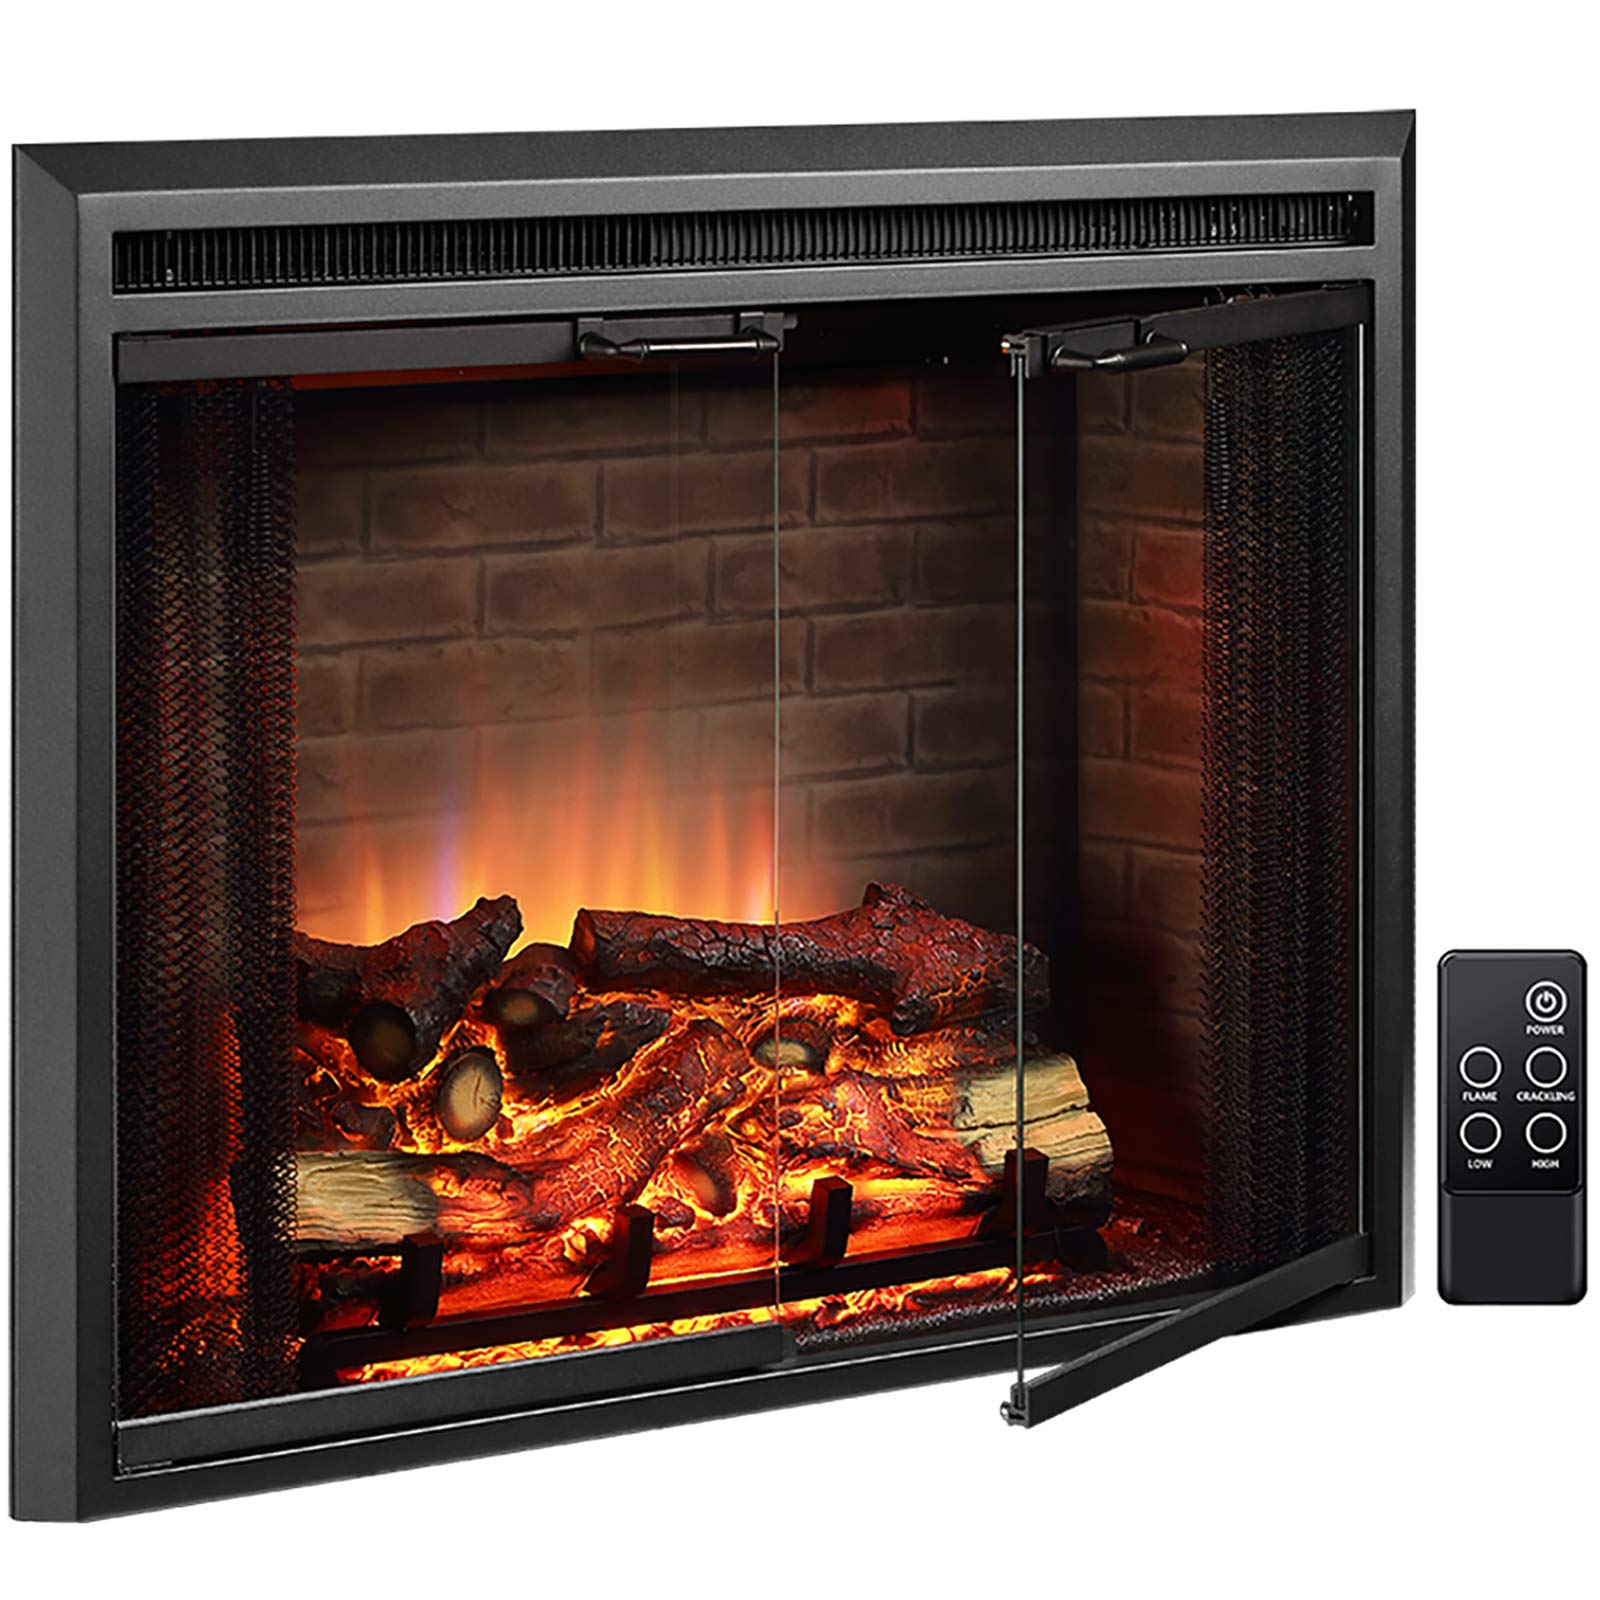 Puraflame Klaus Electric Fireplace Insert With Fire Crackling Sound, Glass Door And Mesh Screen, 7501500W, Black, 33 116 Inches